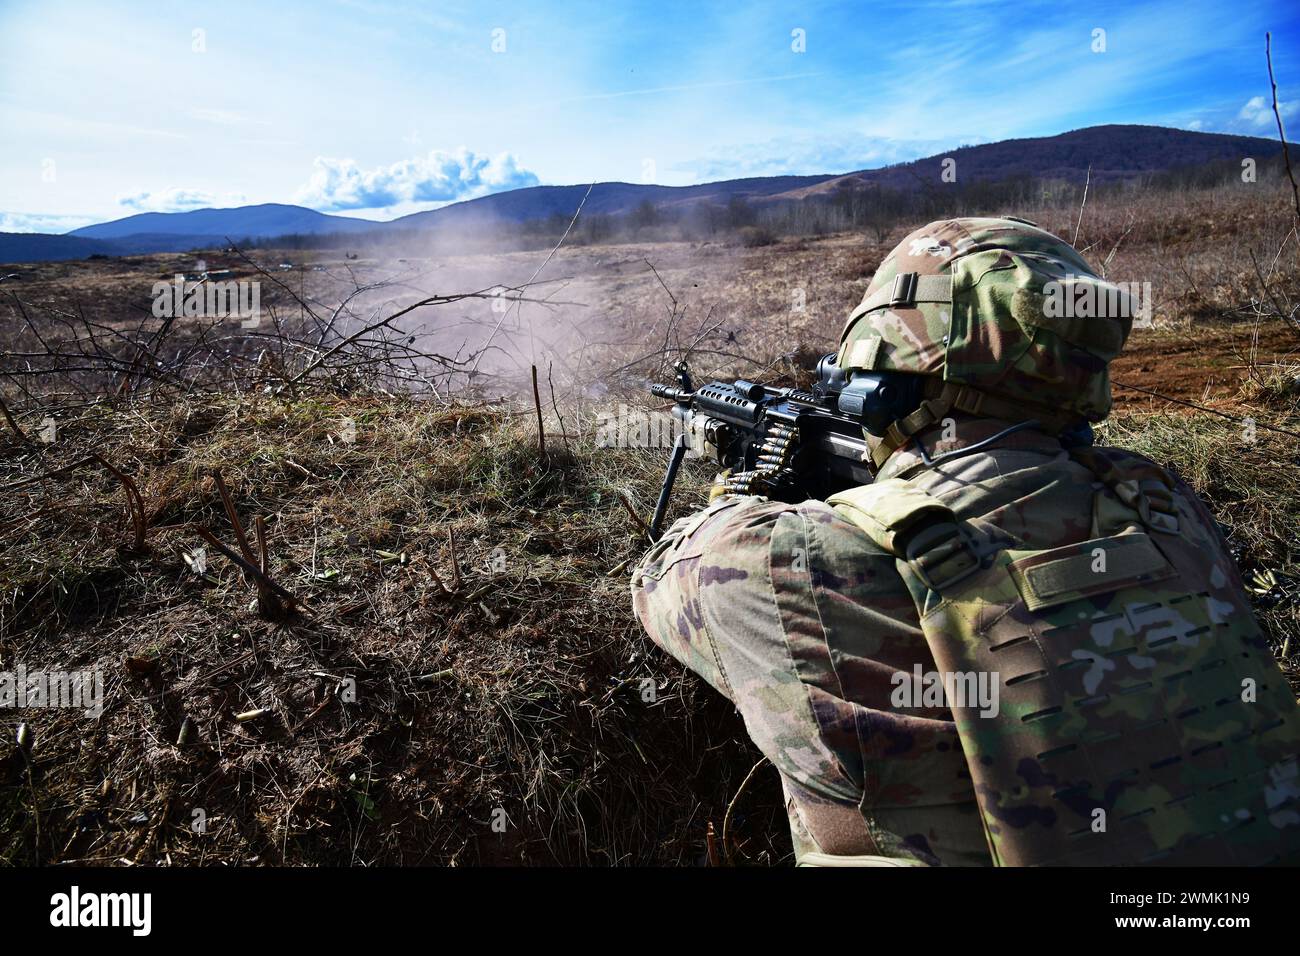 A U.S. Army Paratroopers assigned to the 1st Battalion, 503rd Infantry Regiment, 173rd Airborne Brigade, shoots a target with the M249 light machine gun during team live-fire and tactical movement training as part of Eagle Ursa at the training range in Slunj, Croatia, Feb. 25, 2024. The 173rd Airborne Brigade is the U.S. Army's Contingency Response Force in Europe, providing rapidly deployable forces to the United States European, African, and Central Command areas of responsibility. Forward deployed across Italy and Germany, the brigade routinely trains alongside NATO allies and partners to b Stock Photo